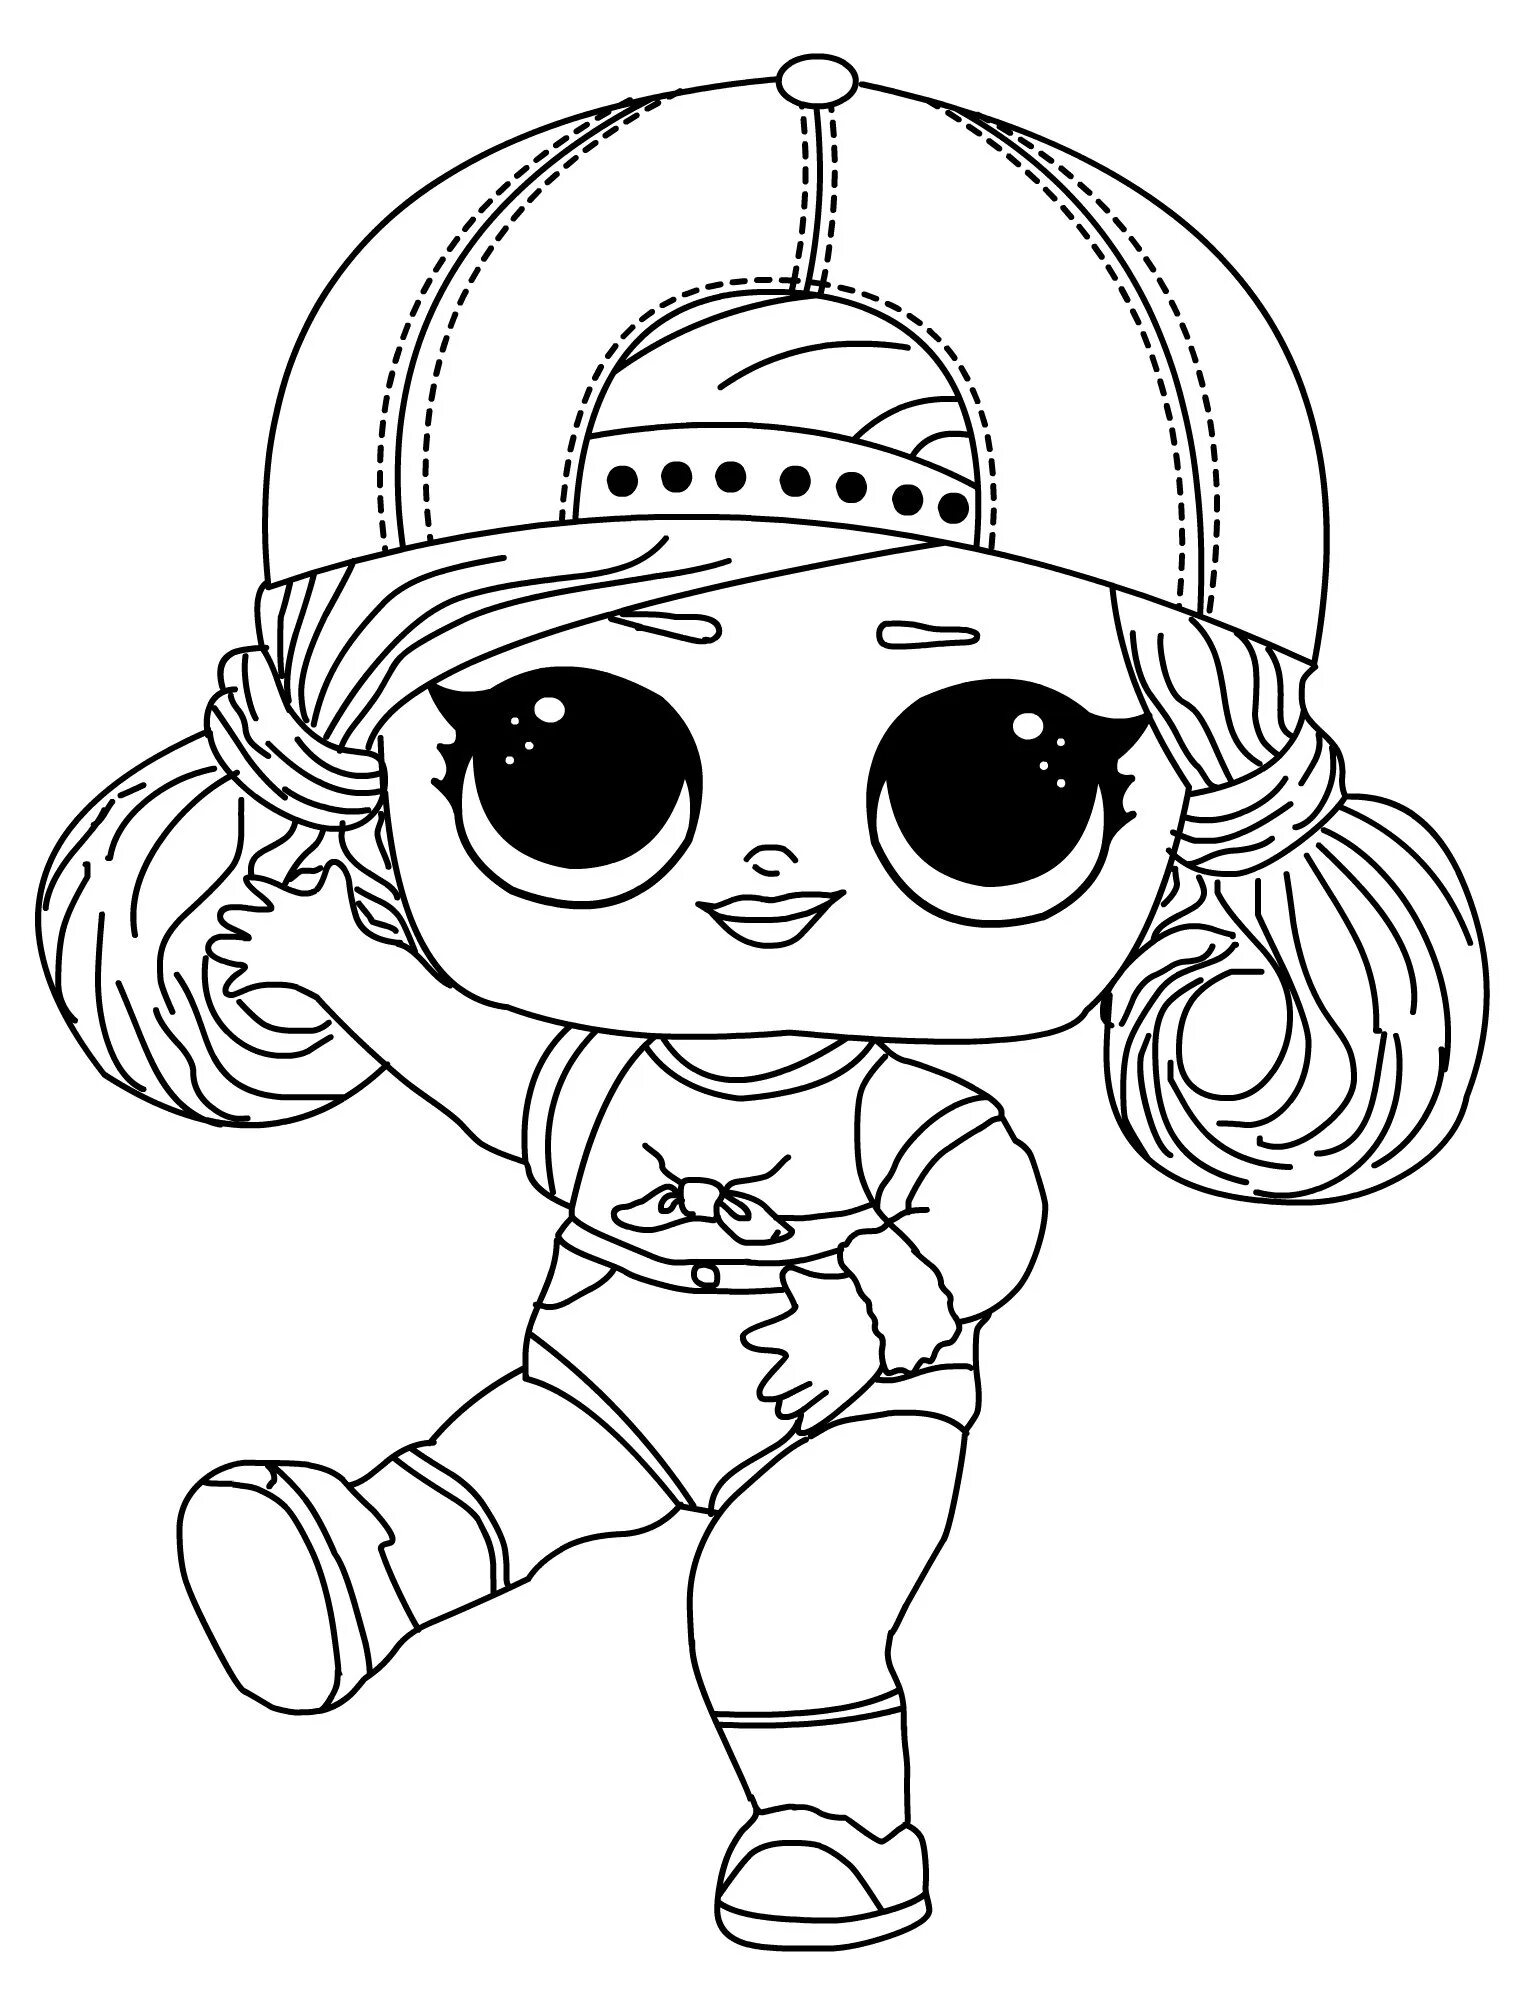 Colorful dolls turn on lol coloring page